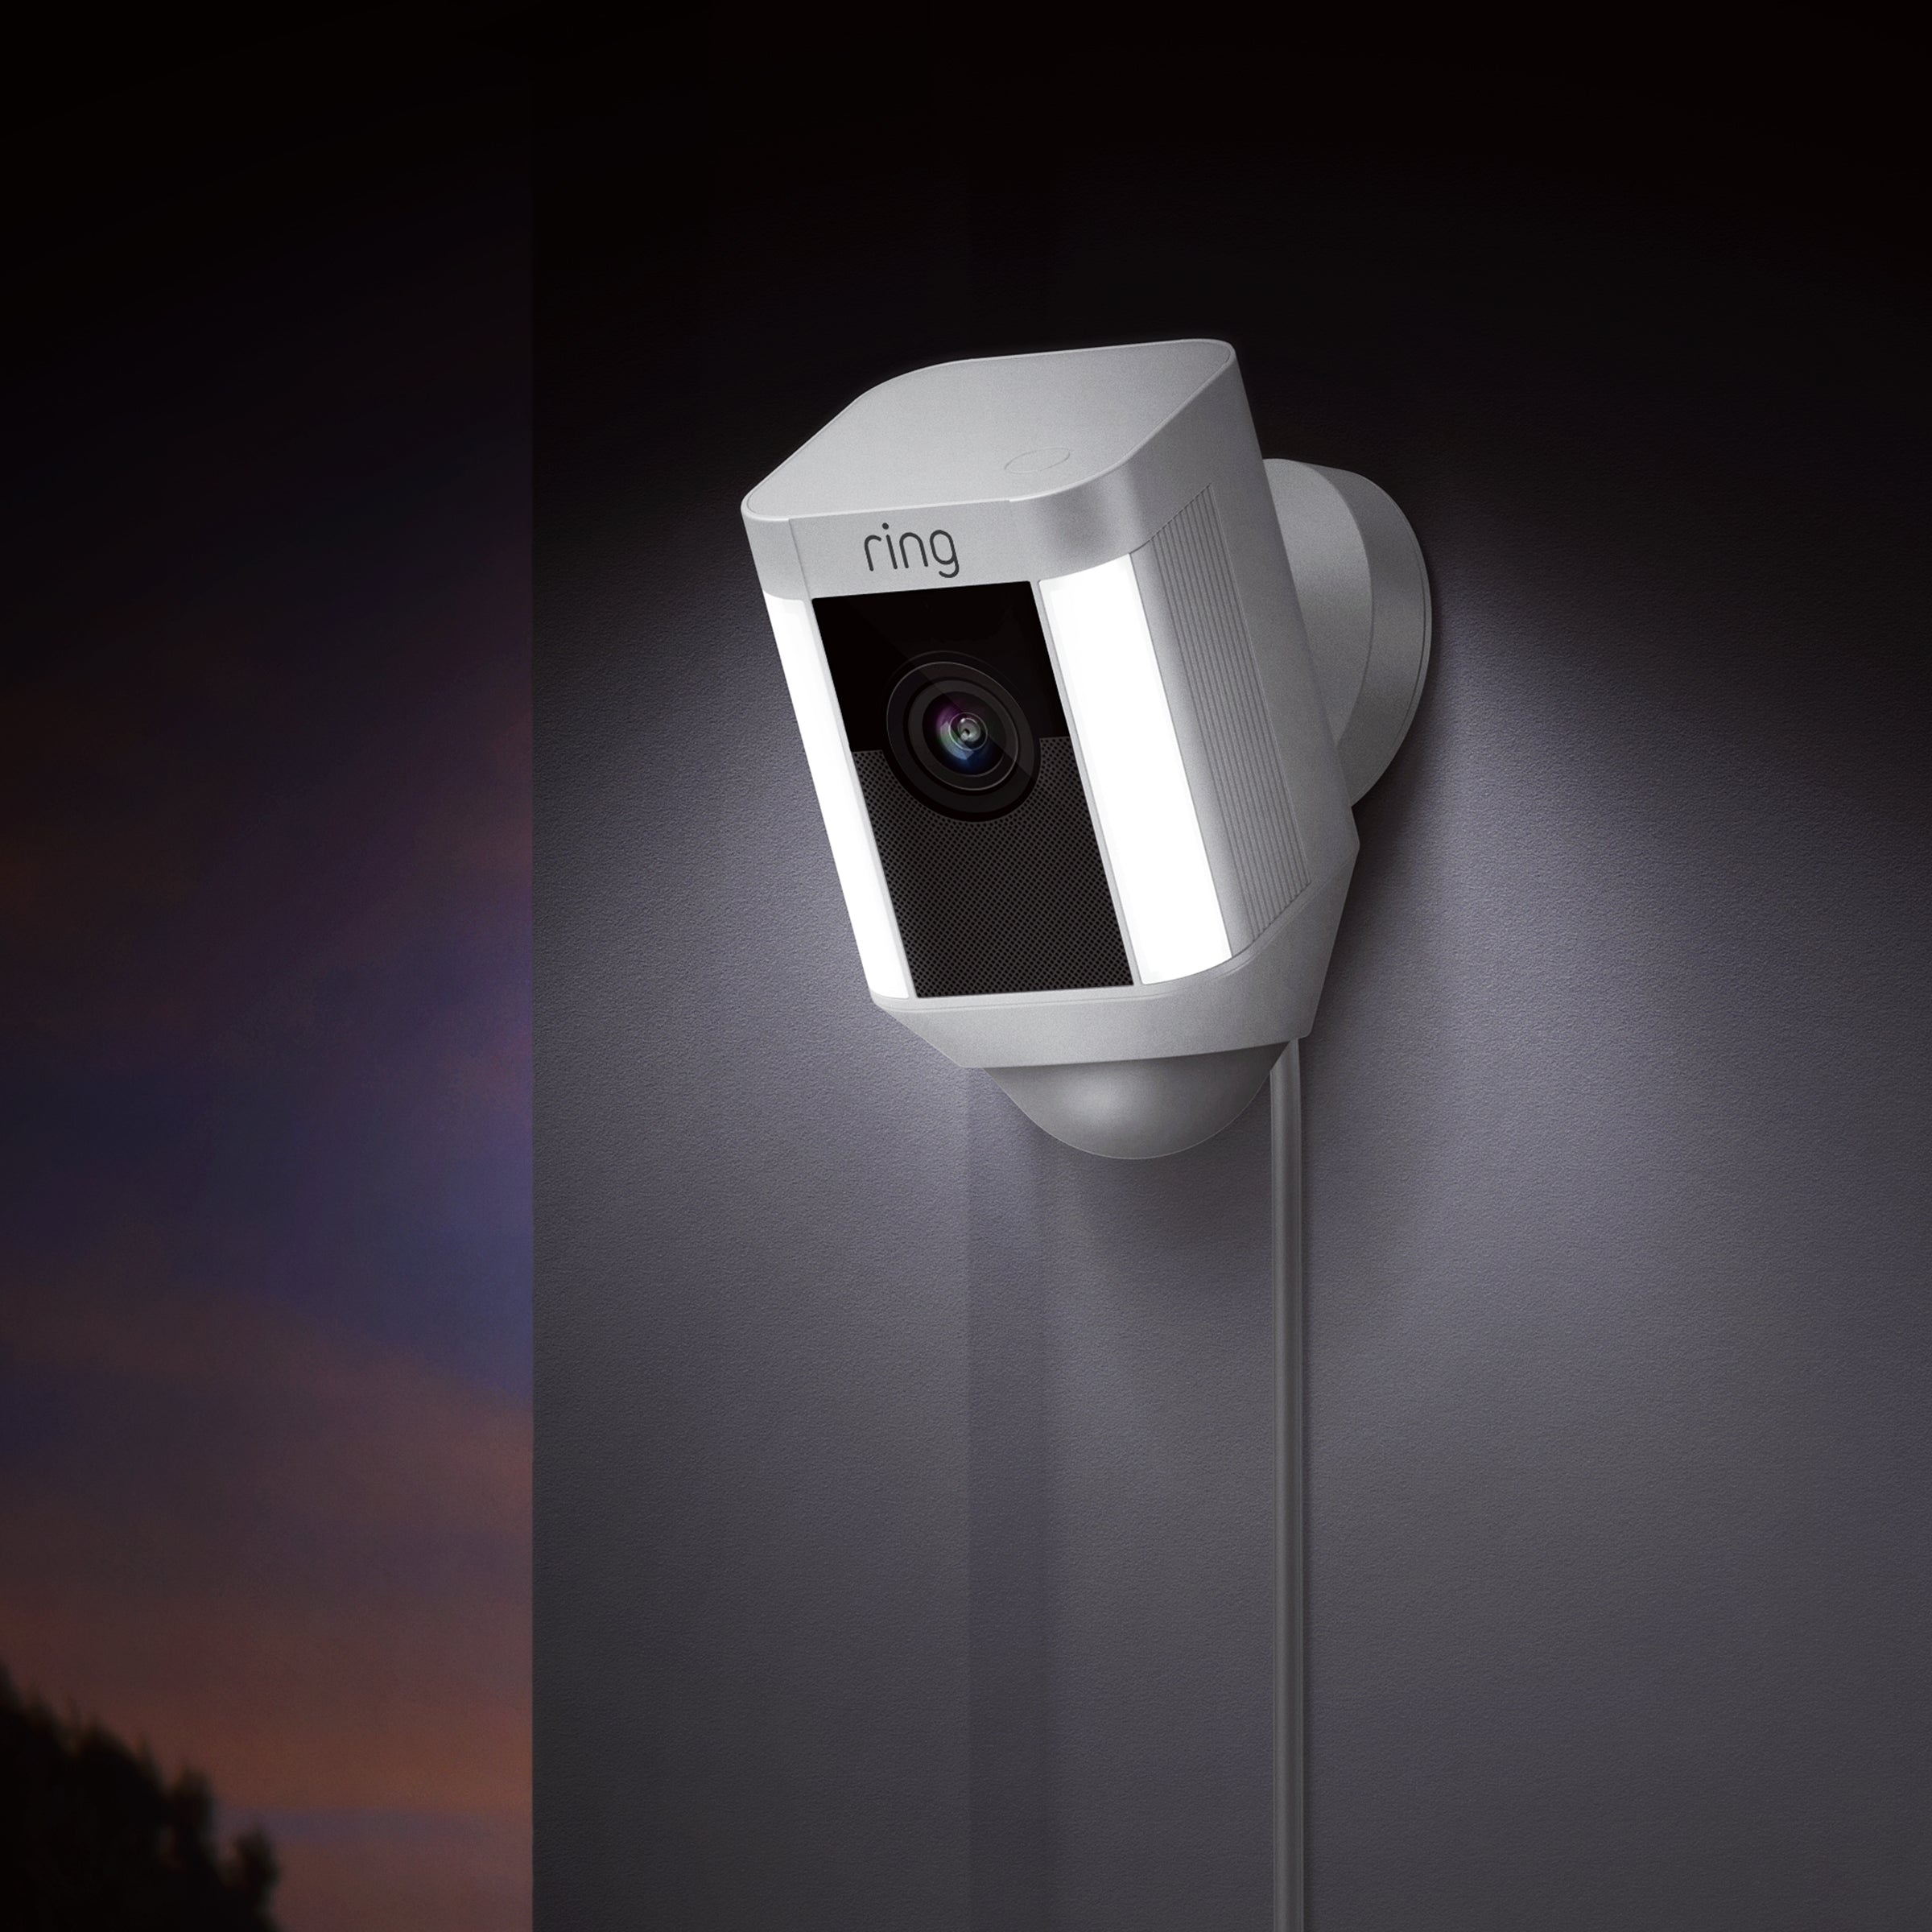 Ring Spotlight Cam Wired: Plugged-in HD security camera with built-in spotlights, two-way talk and a siren alarm, Works with Alexa